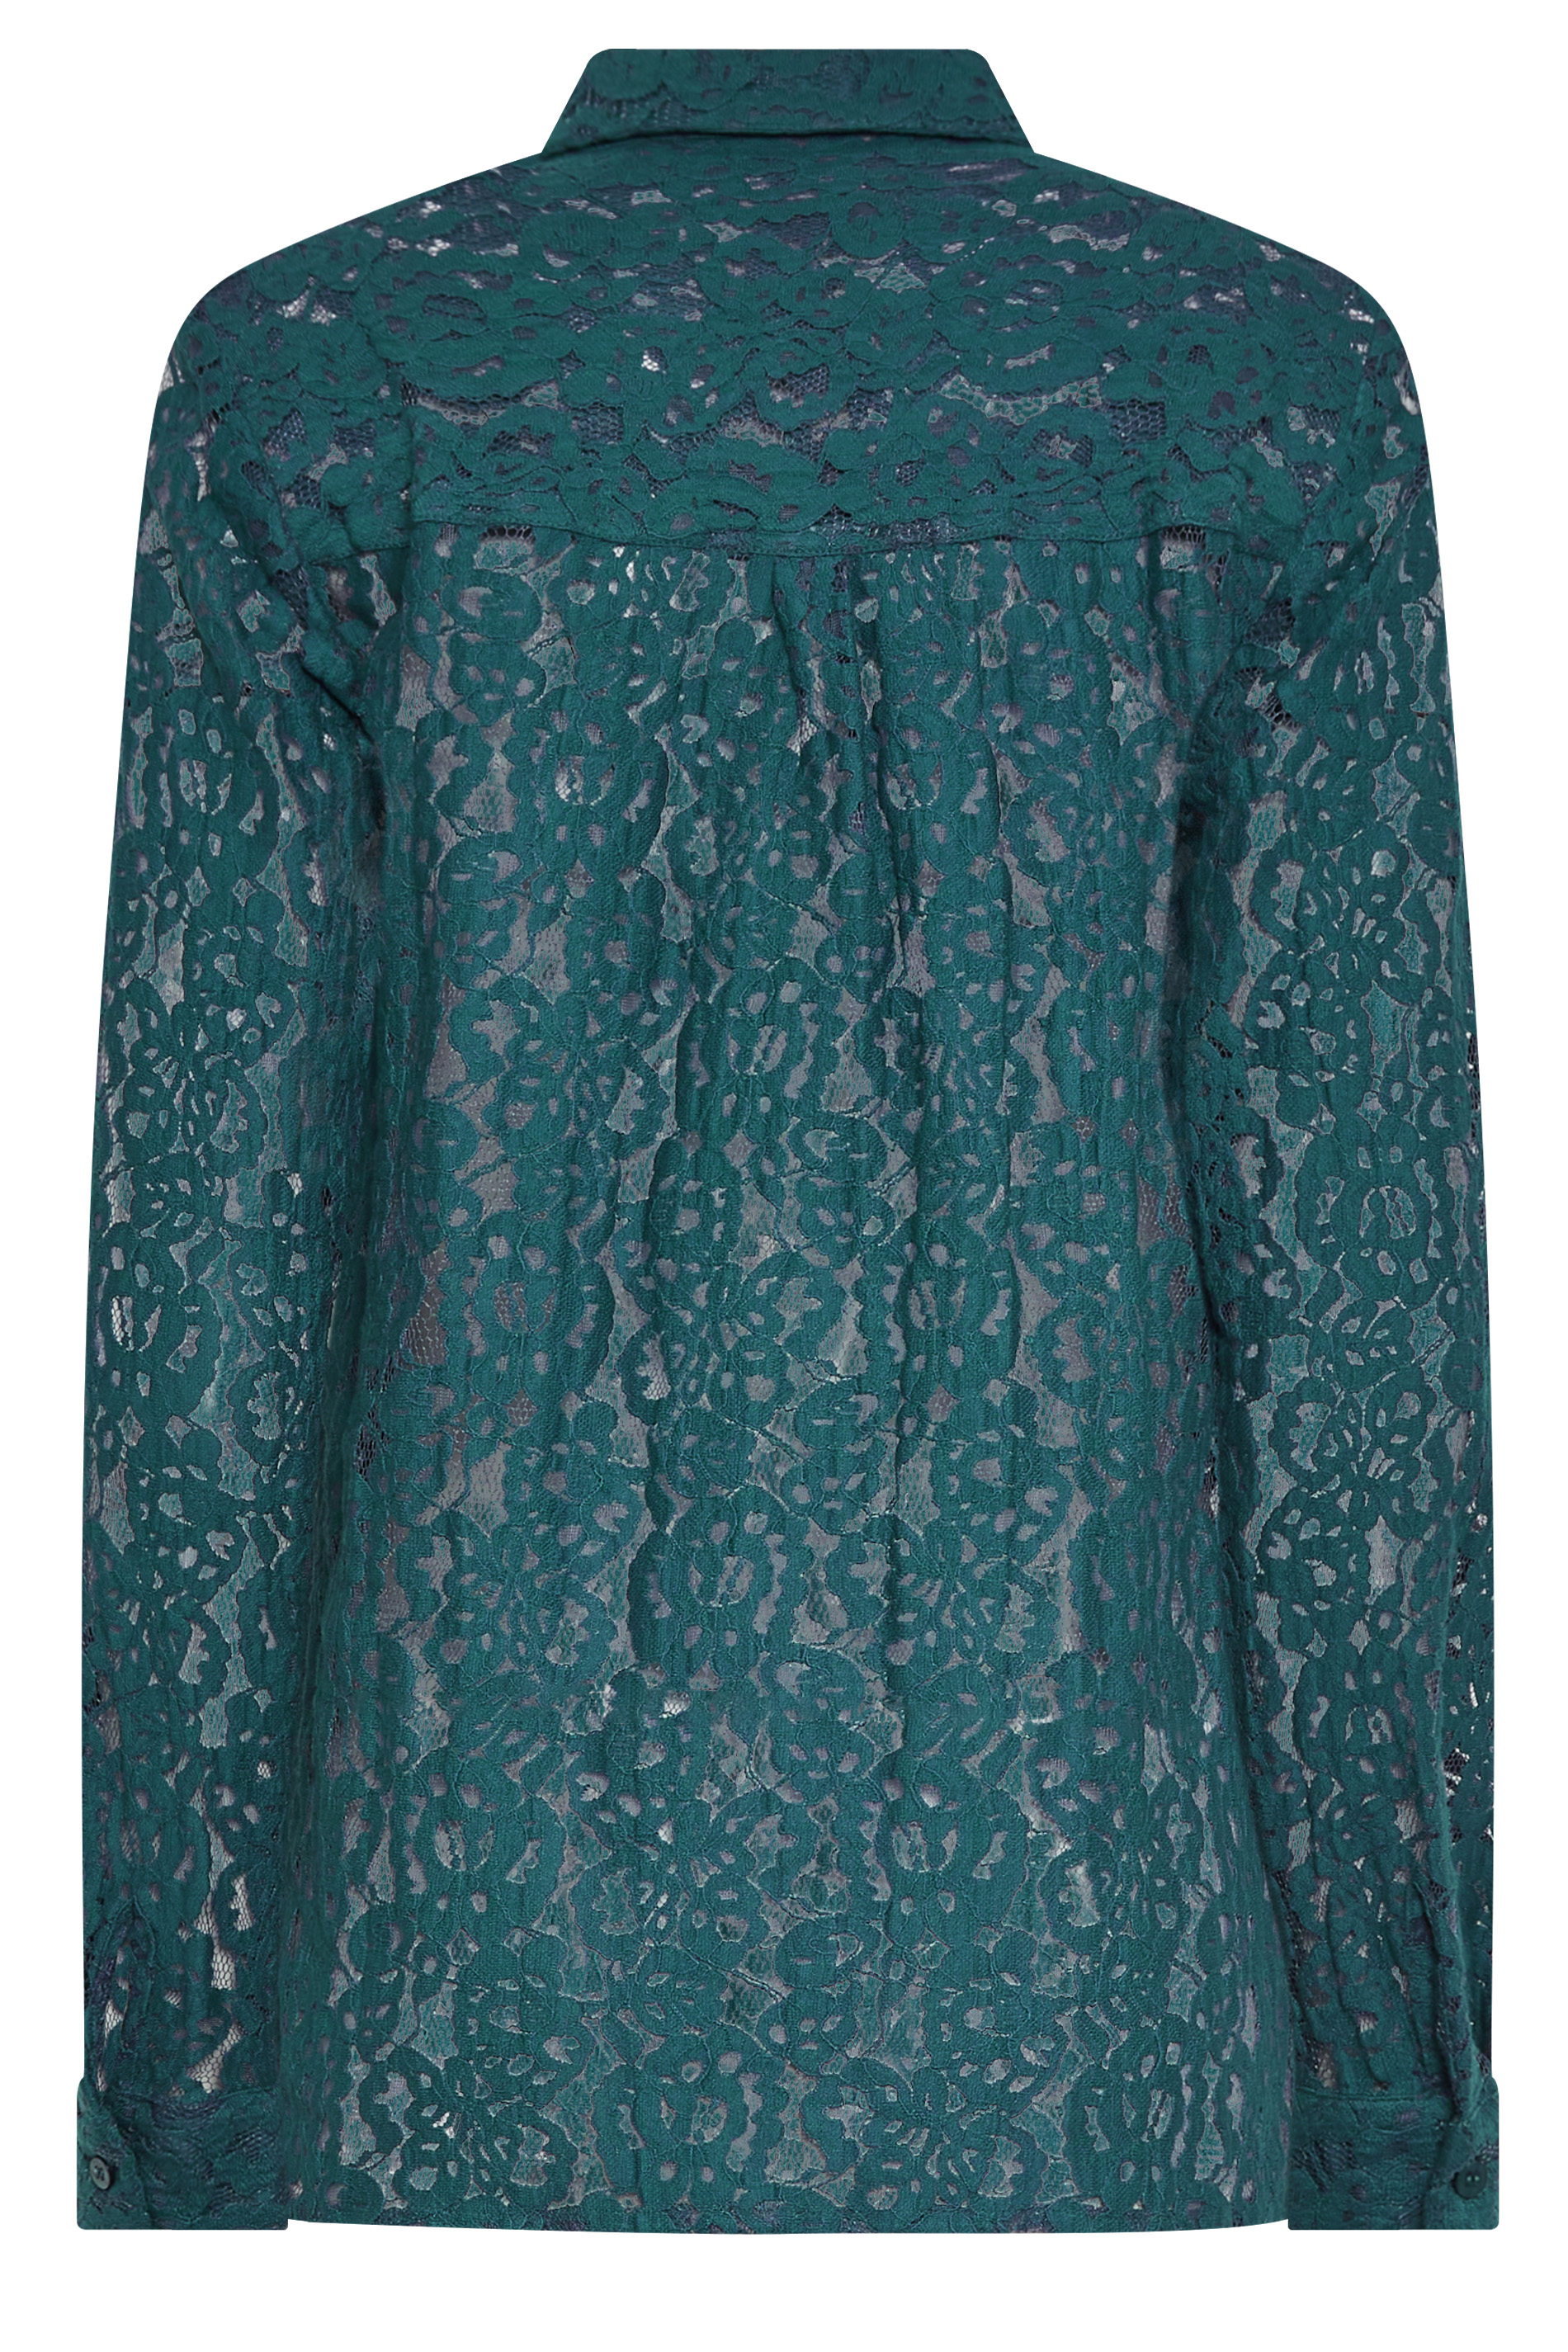 LTS Tall Teal Blue Lace Detail Blouse | Long Tall Sally